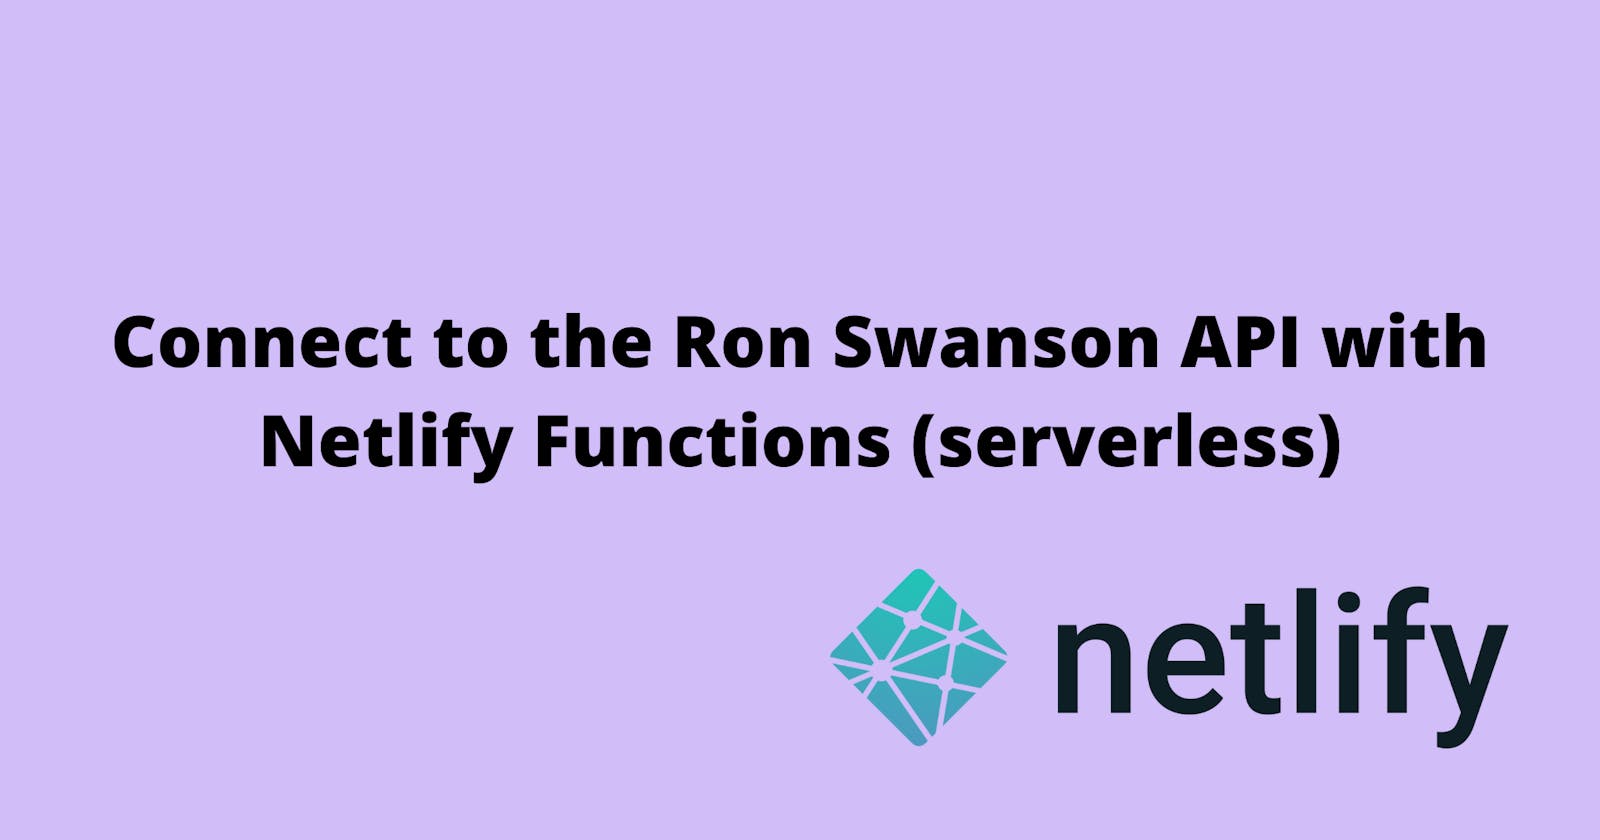 Connect to the Ron Swanson Quotes API with Netlify Functions (serverless)